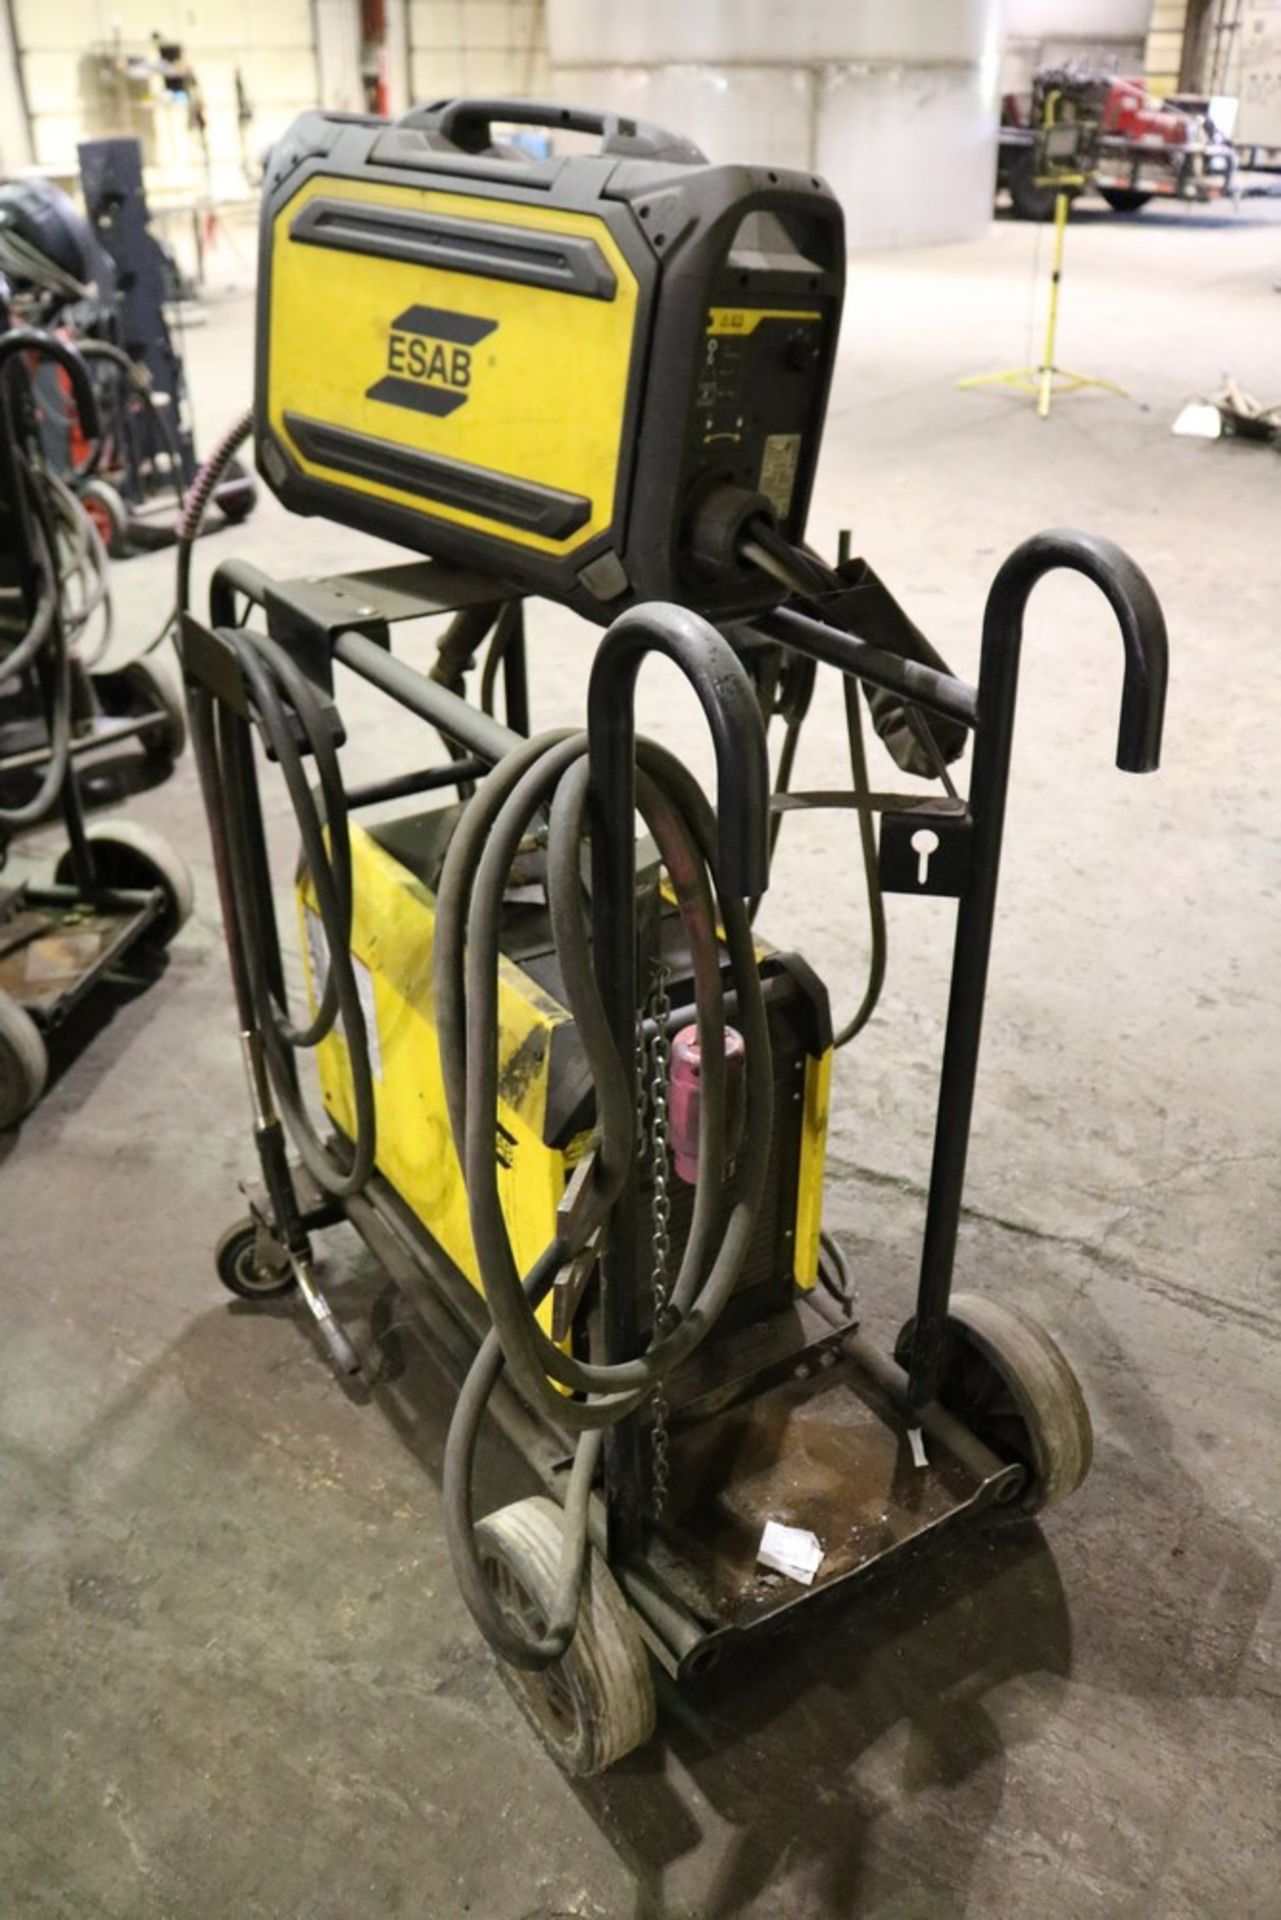 ESAB Warrior 500i Multi Process Welder with Robust Feed Pro Unit - Image 6 of 10